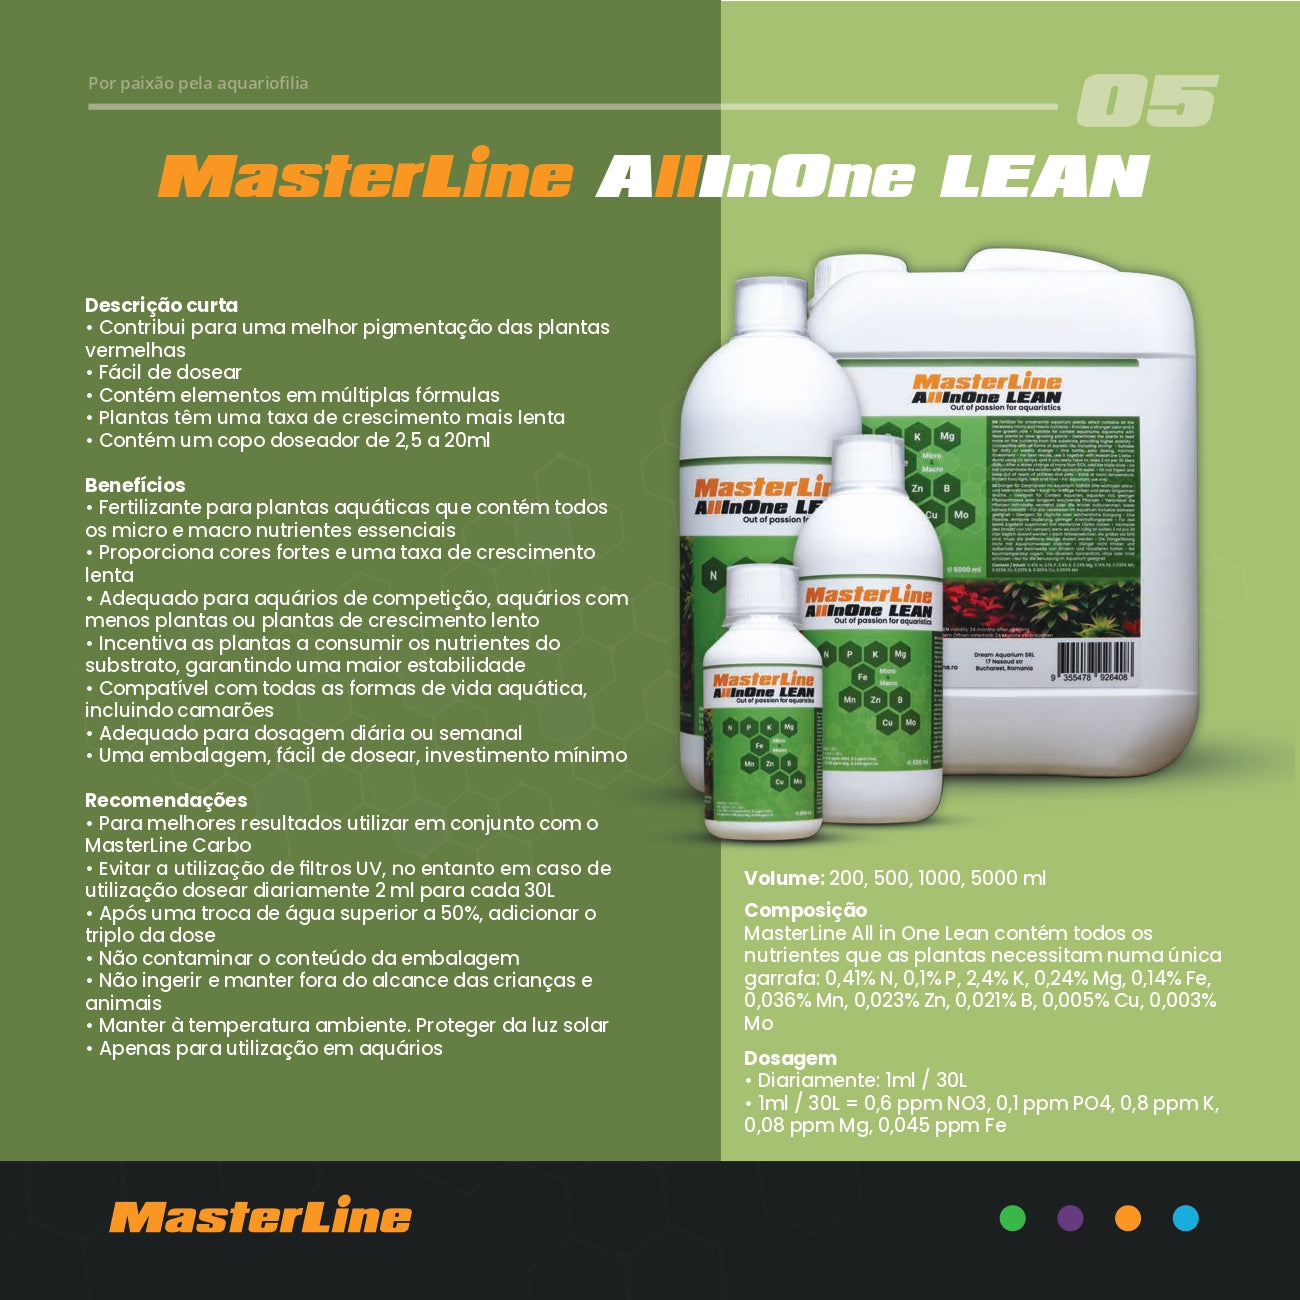 MasterLine All In One - Lean